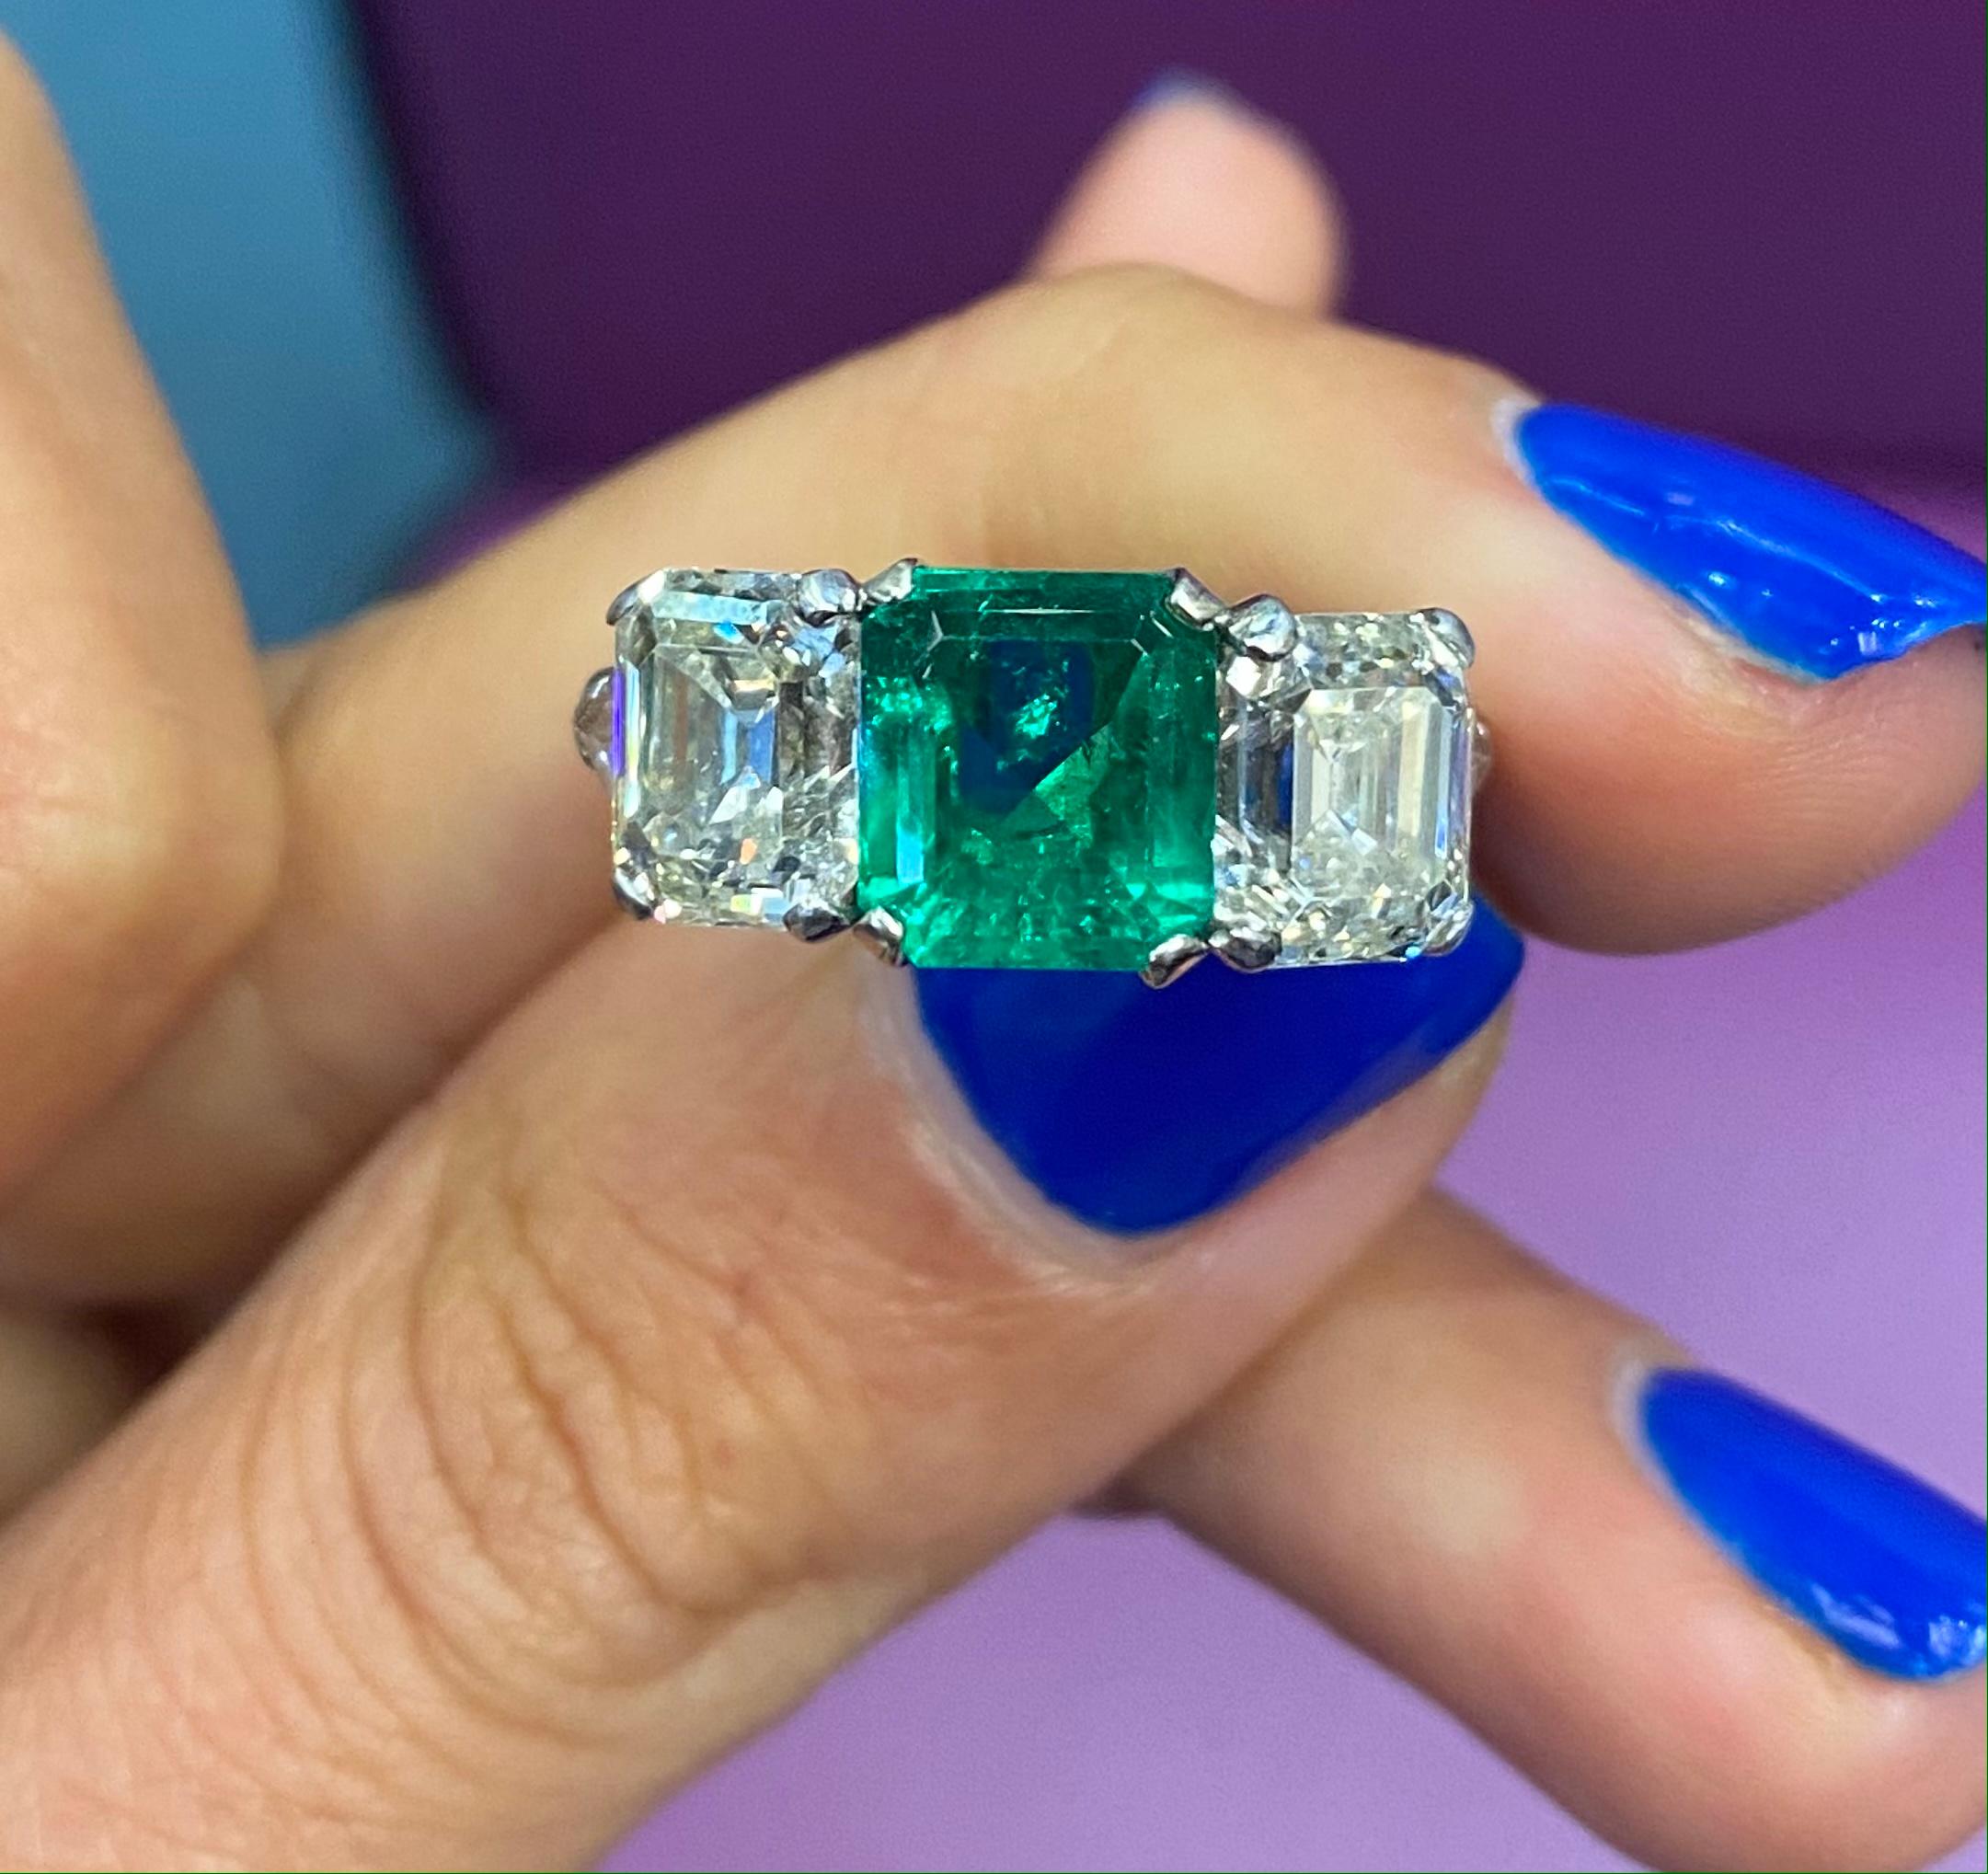 GIA Certified Emerald & Diamond Three Stone Ring
Emerald Weight: 2.24 Cts 
Two Diamonds Weight: 3.50 Cts
Ring Size: 4.5
Re sizable to any size free of charge 
Platinum


